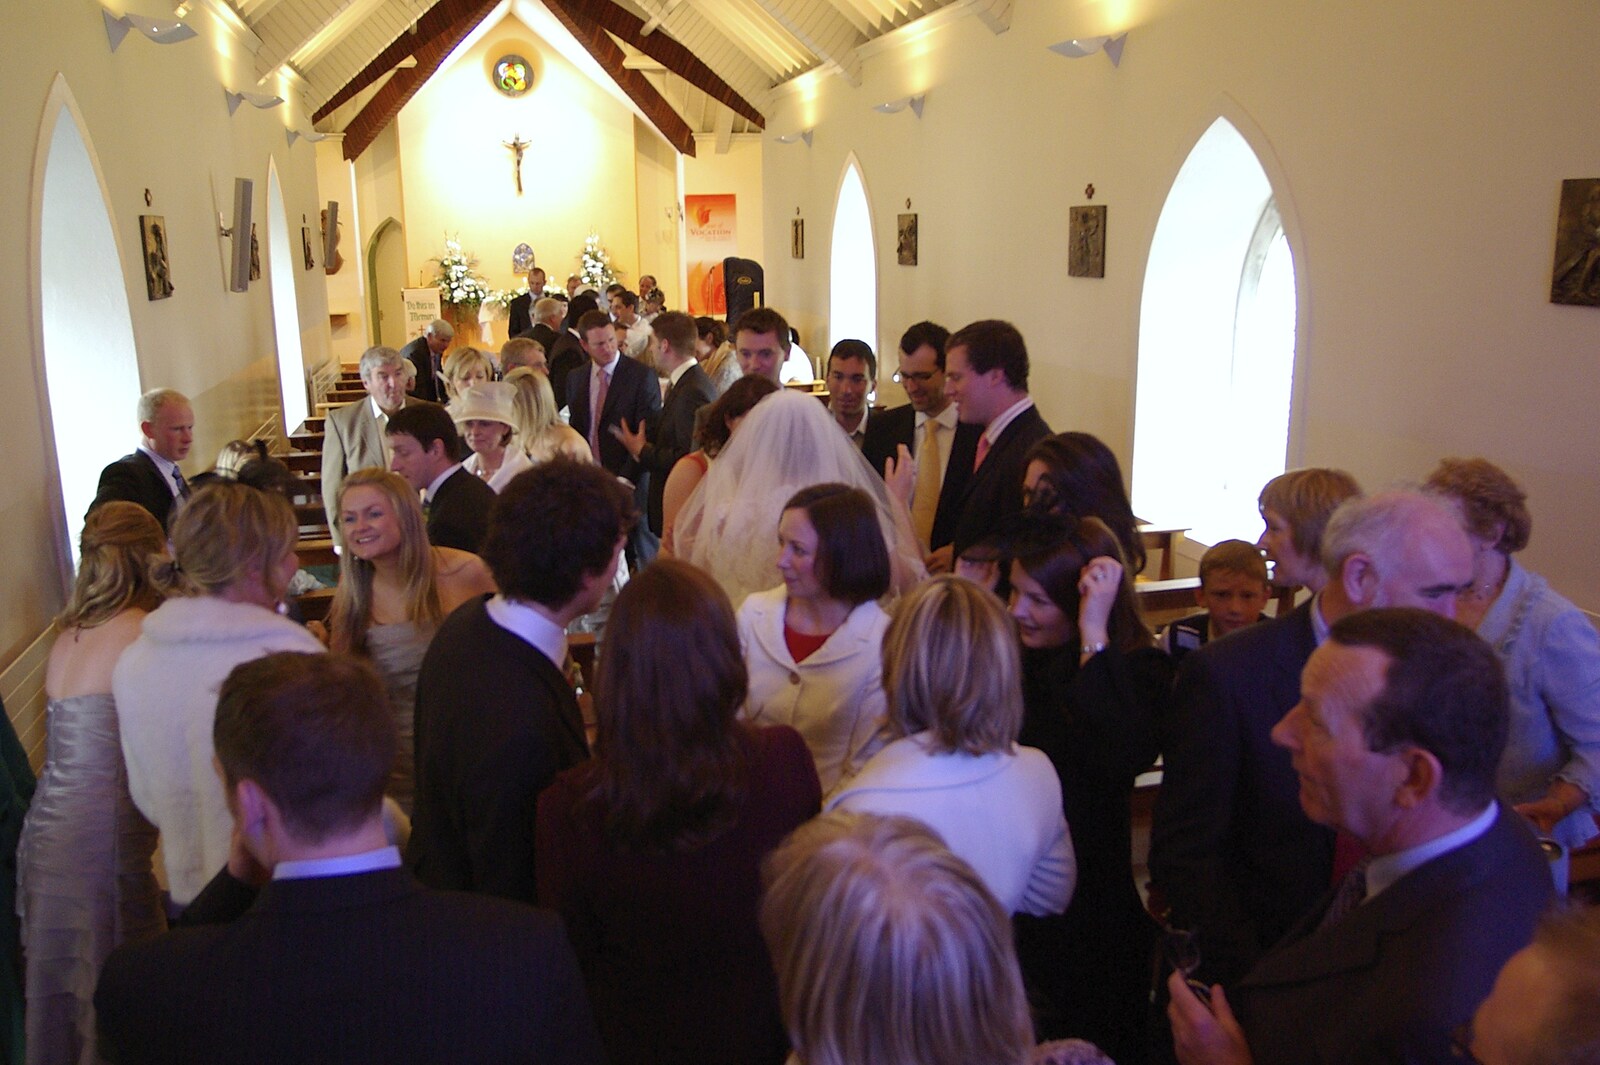 Paul and Jenny's Wedding, Tralee, County Kerry, Ireland - 3rd May 2008: The church is full